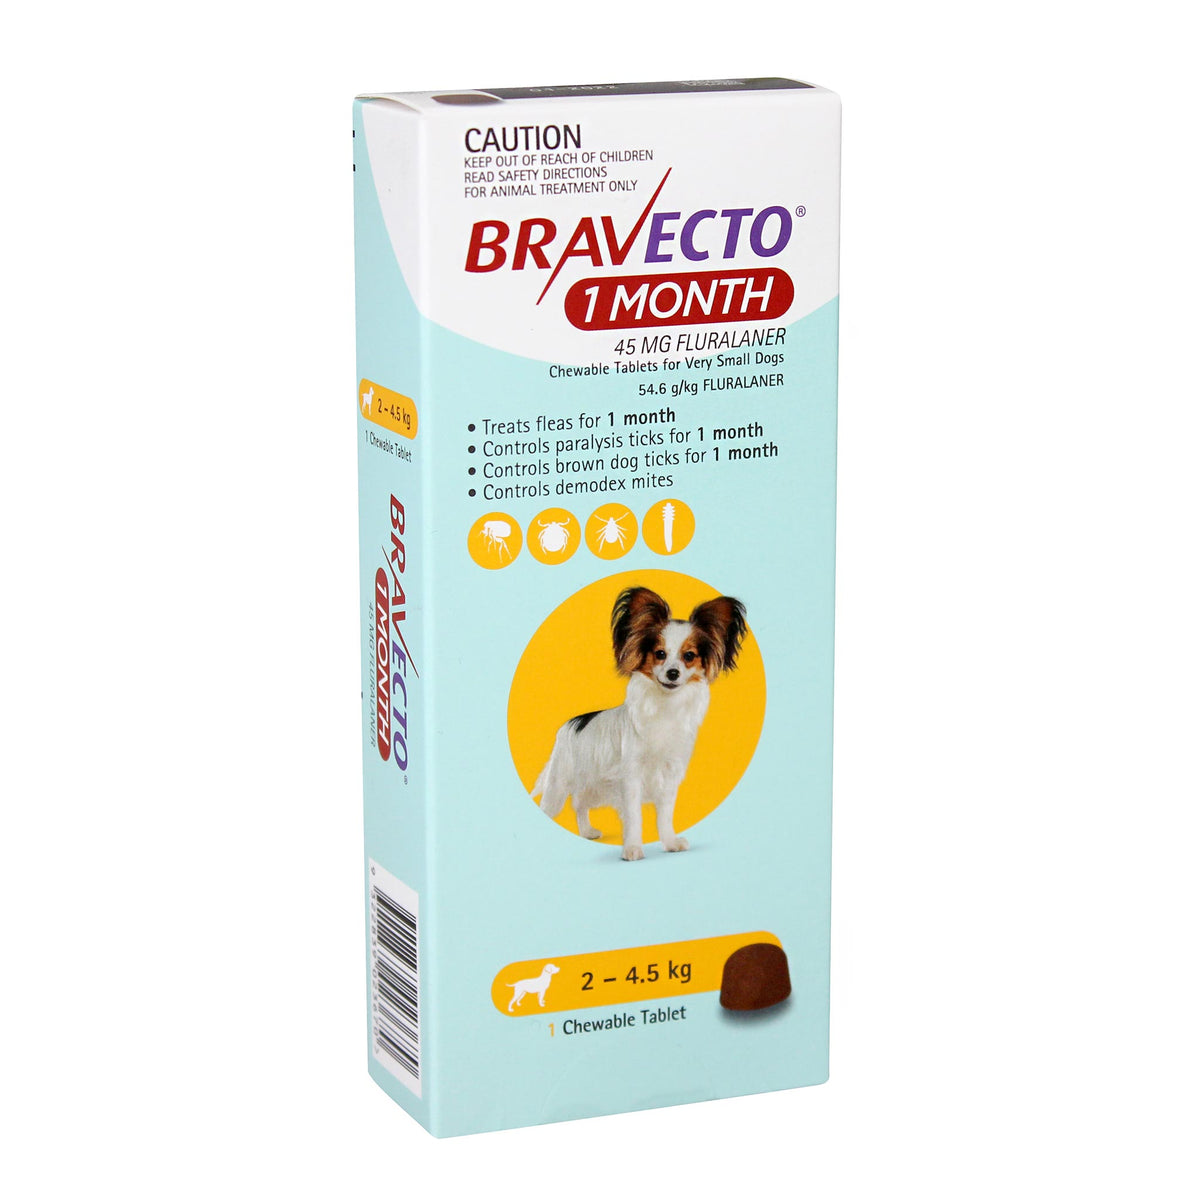 Bravecto 1 Month Chews are highly palatable for treatment and control of fleas and ticks on dogs.